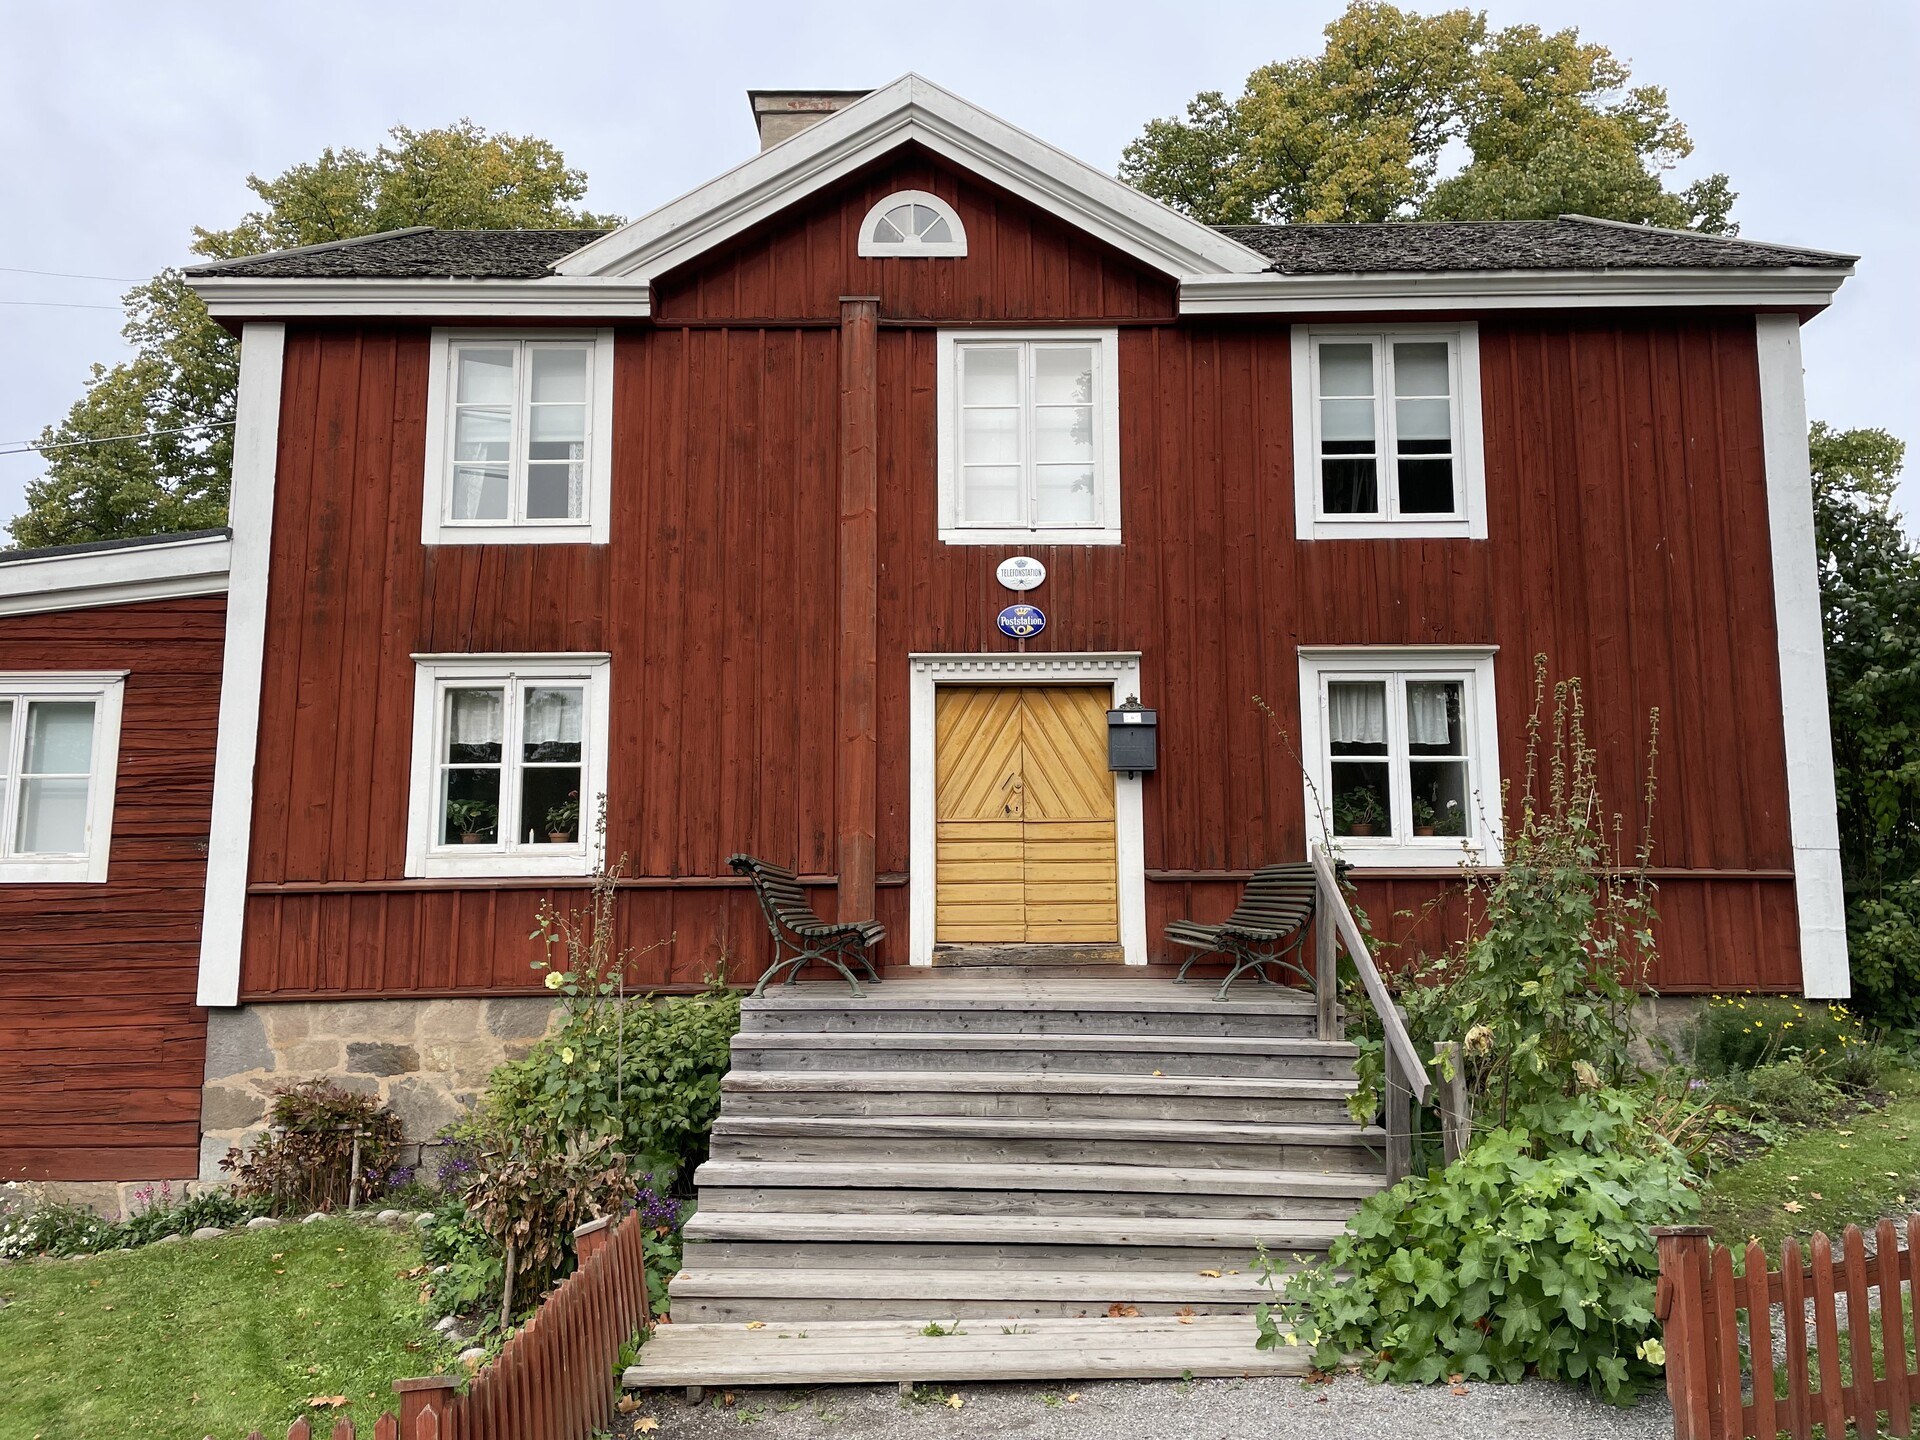 The front plan of an asymmetric red wooden house in traditional Swedish style